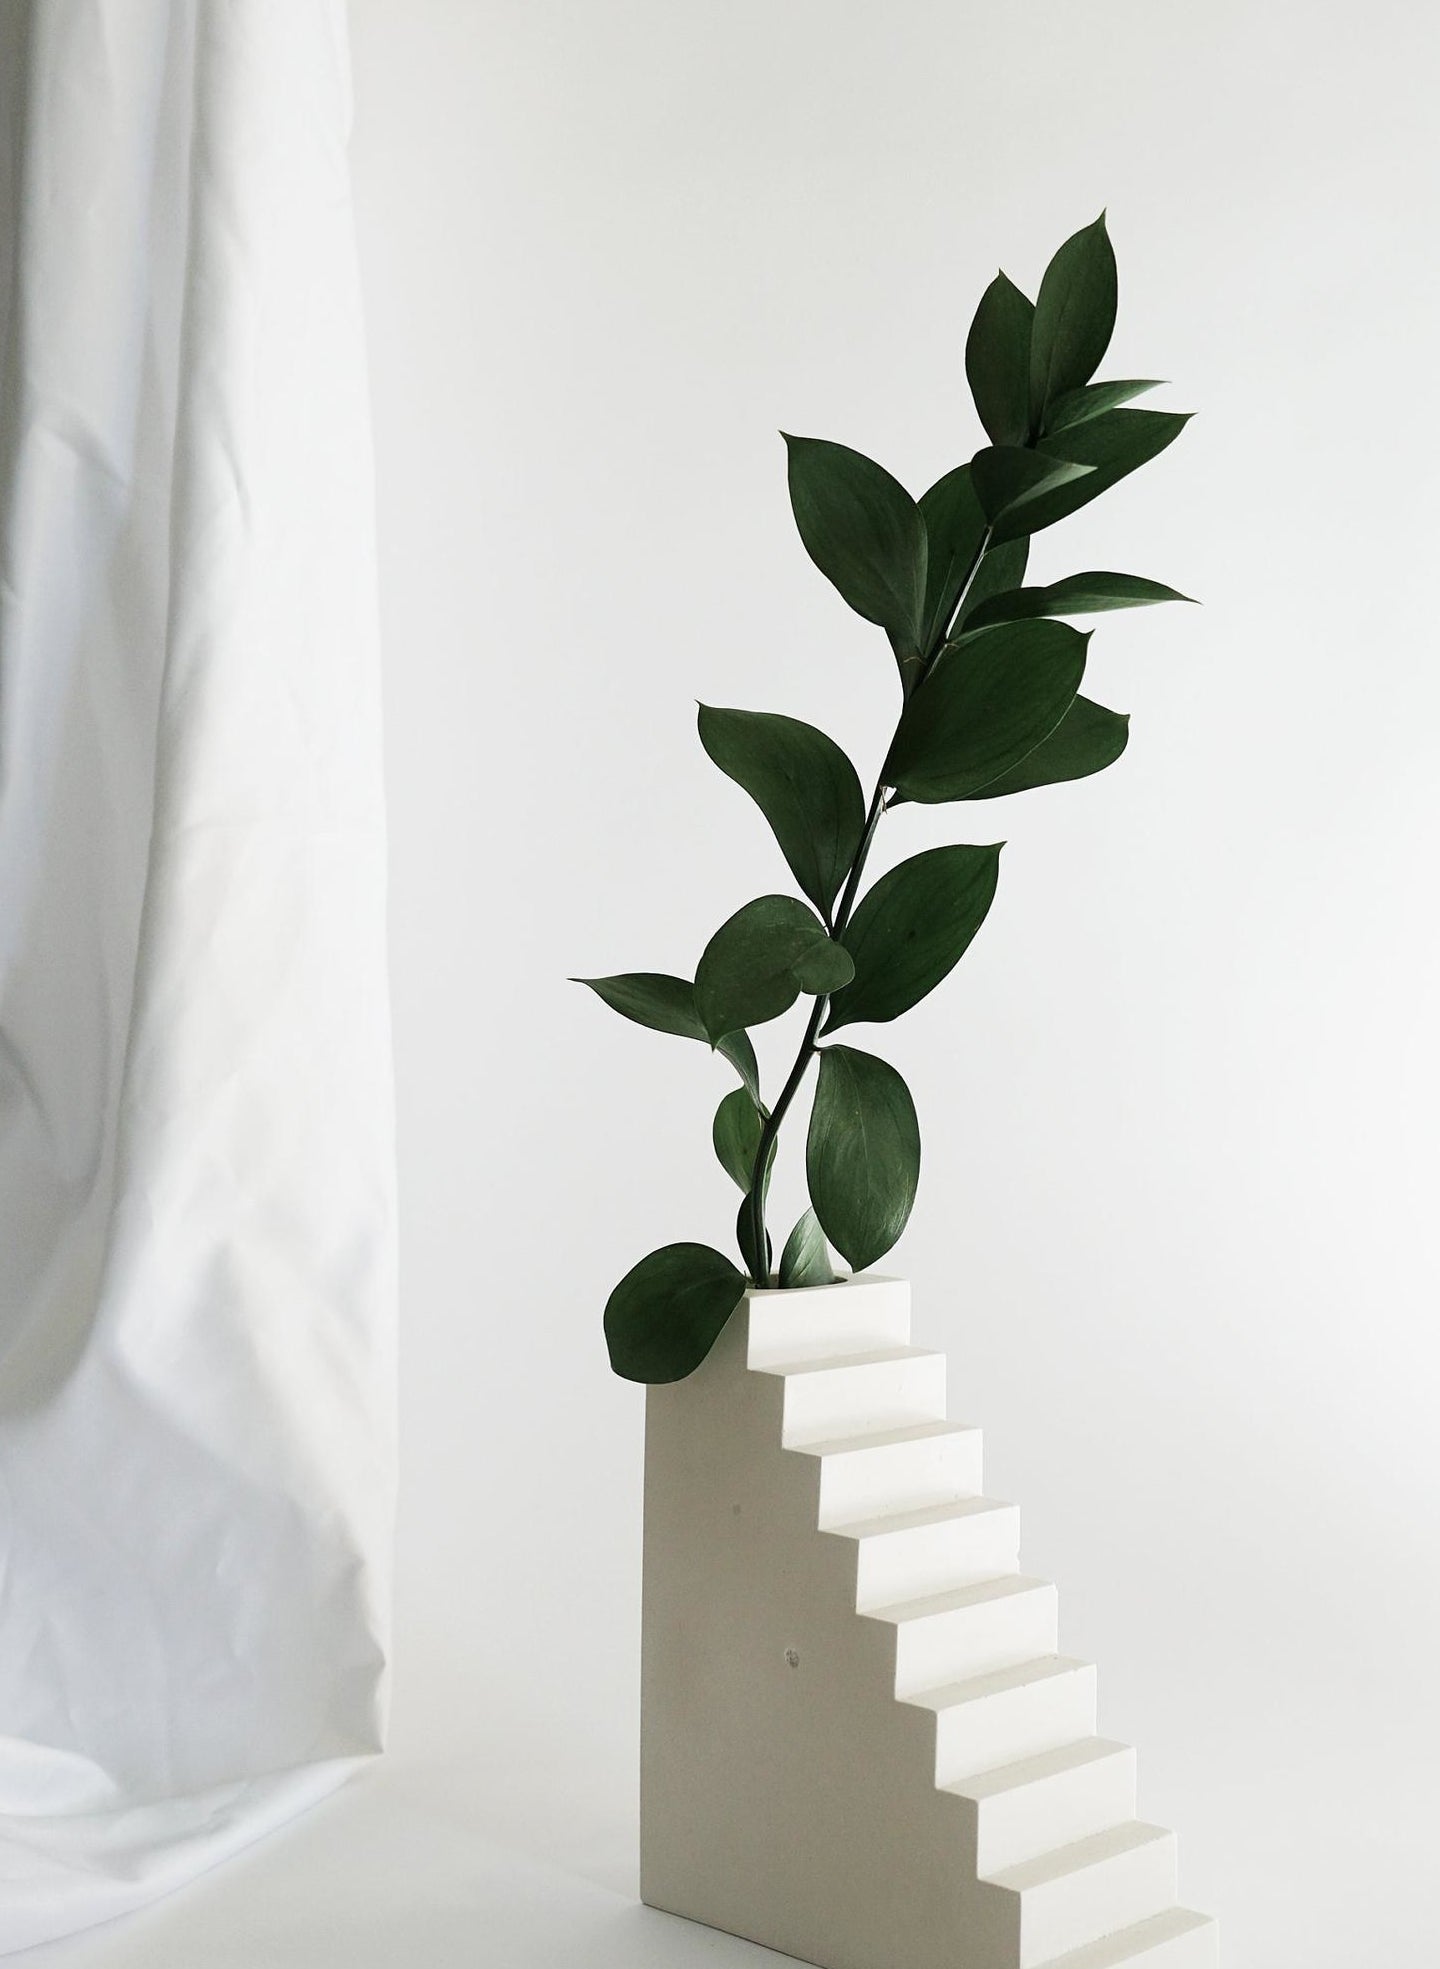 white concrete vase shaped like a flight of stairs with a small rectangular opening on top holding a leafy branch